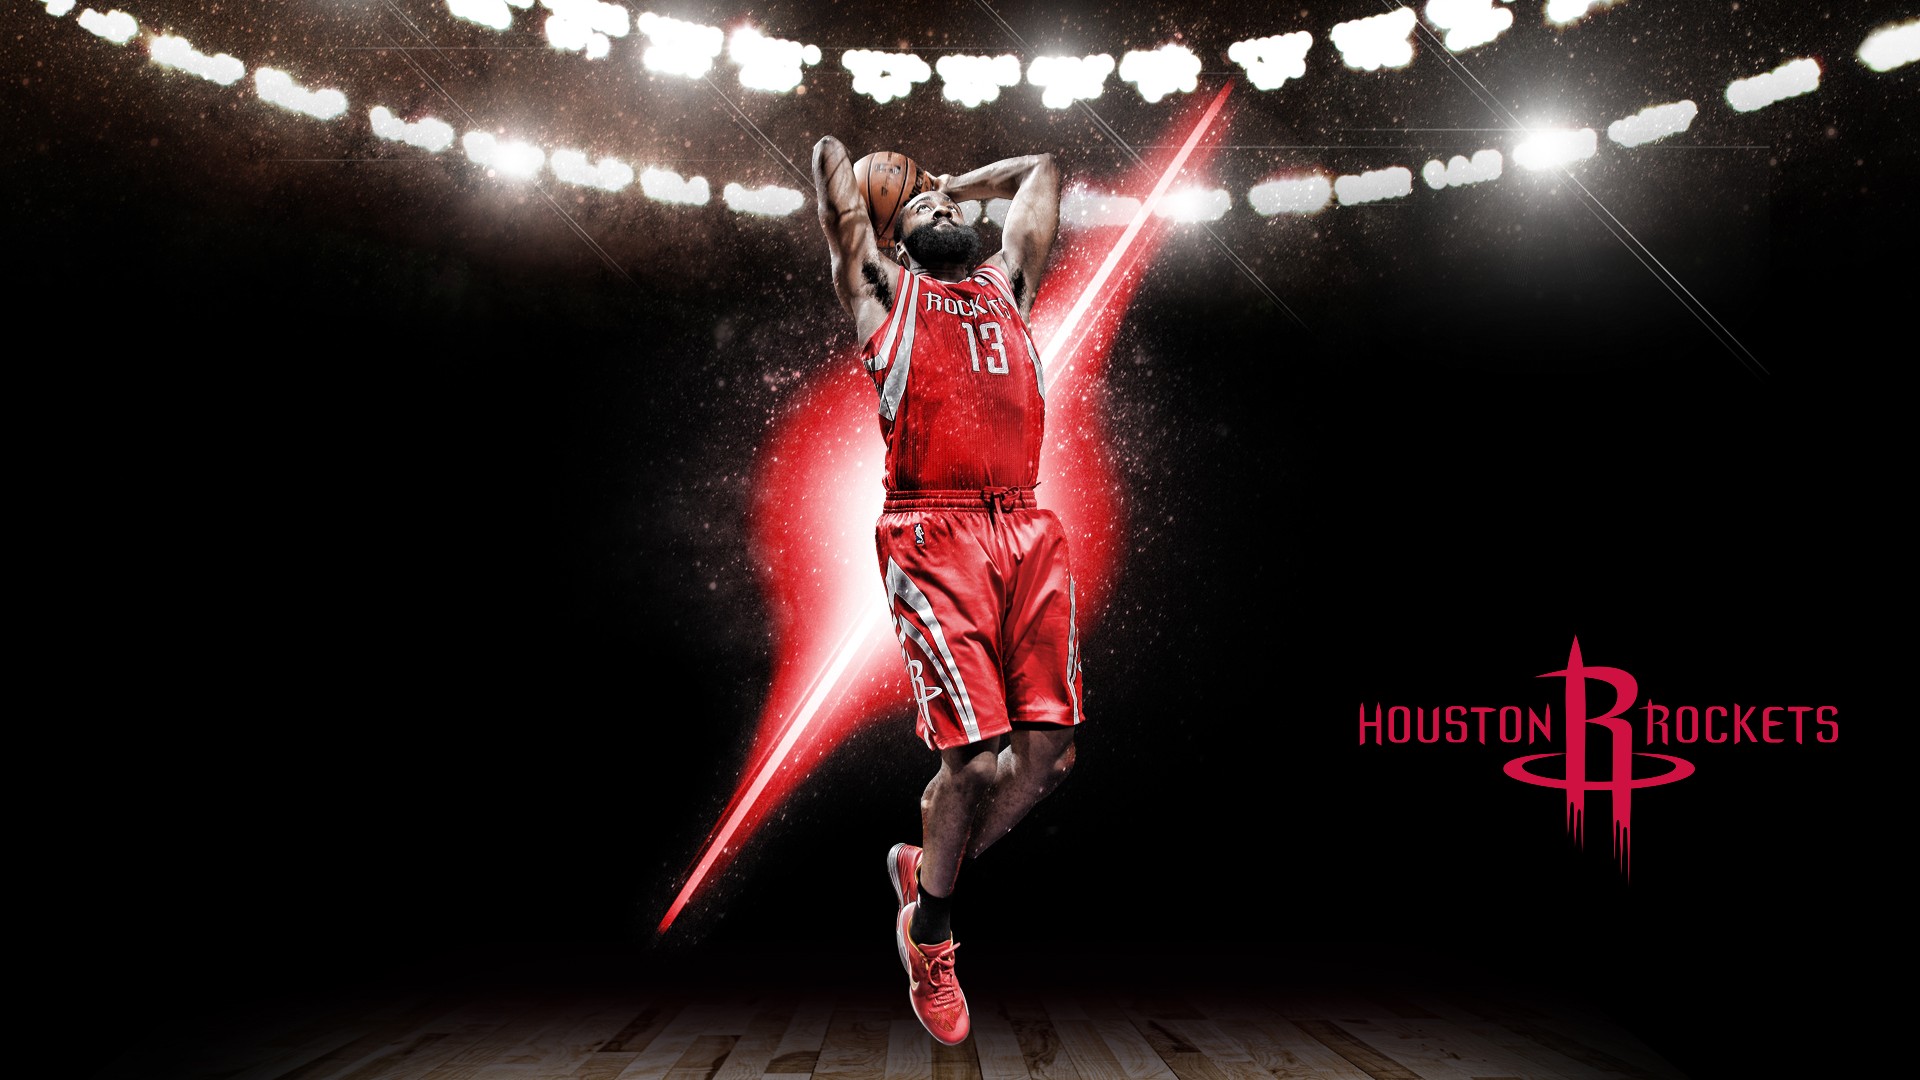 James Harden Desktop Wallpapers with image dimensions 1920x1080 pixel. You can make this wallpaper for your Desktop Computer Backgrounds, Windows or Mac Screensavers, iPhone Lock screen, Tablet or Android and another Mobile Phone device